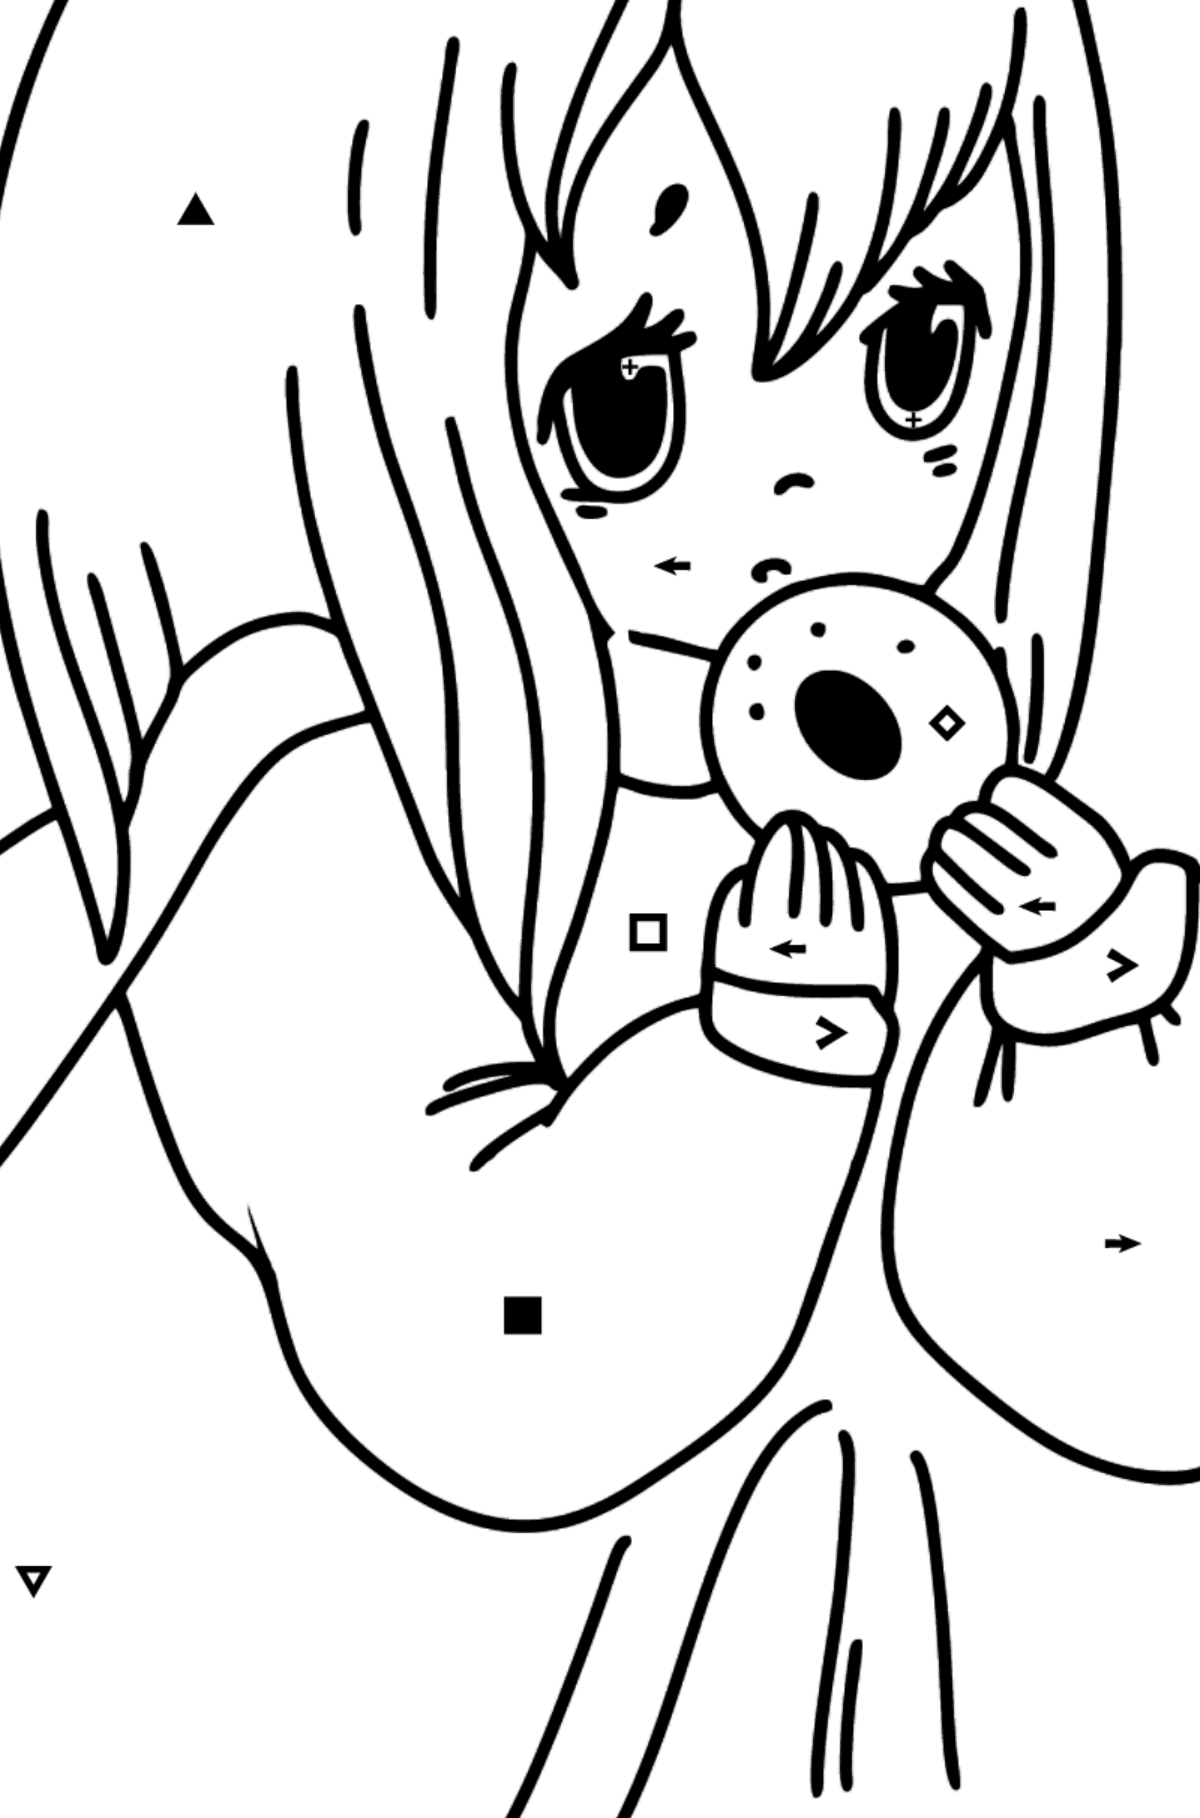 Anime Girl with Donut coloring page - Coloring by Symbols for Kids